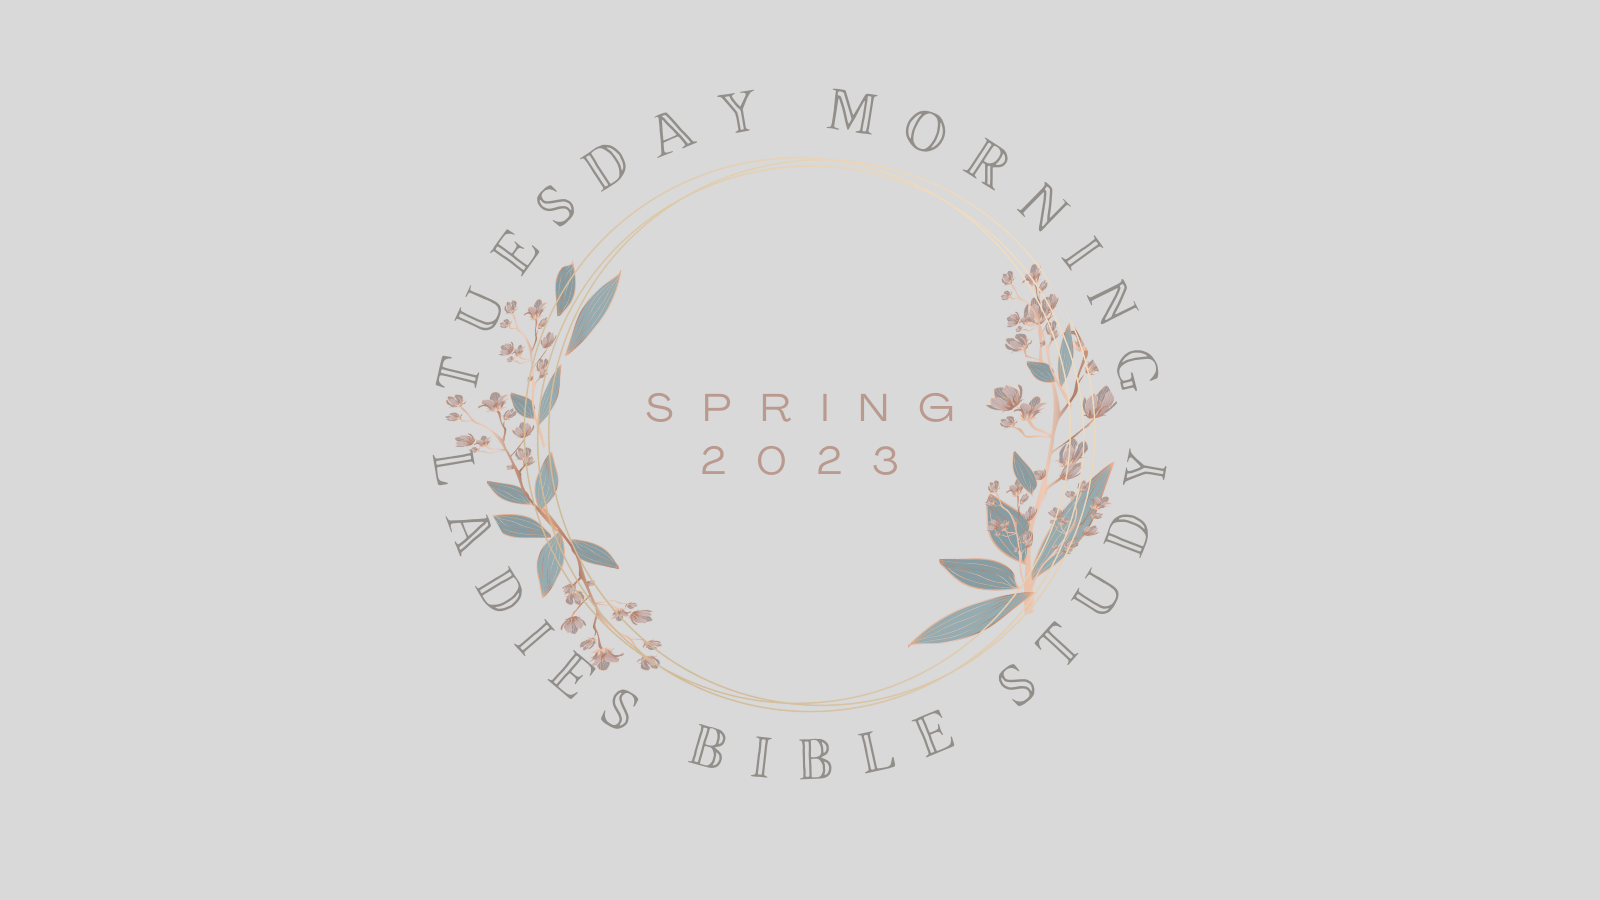 Tuesday Morning Ladies Bible Study graphic spring 23 (1600 × 900 px) image